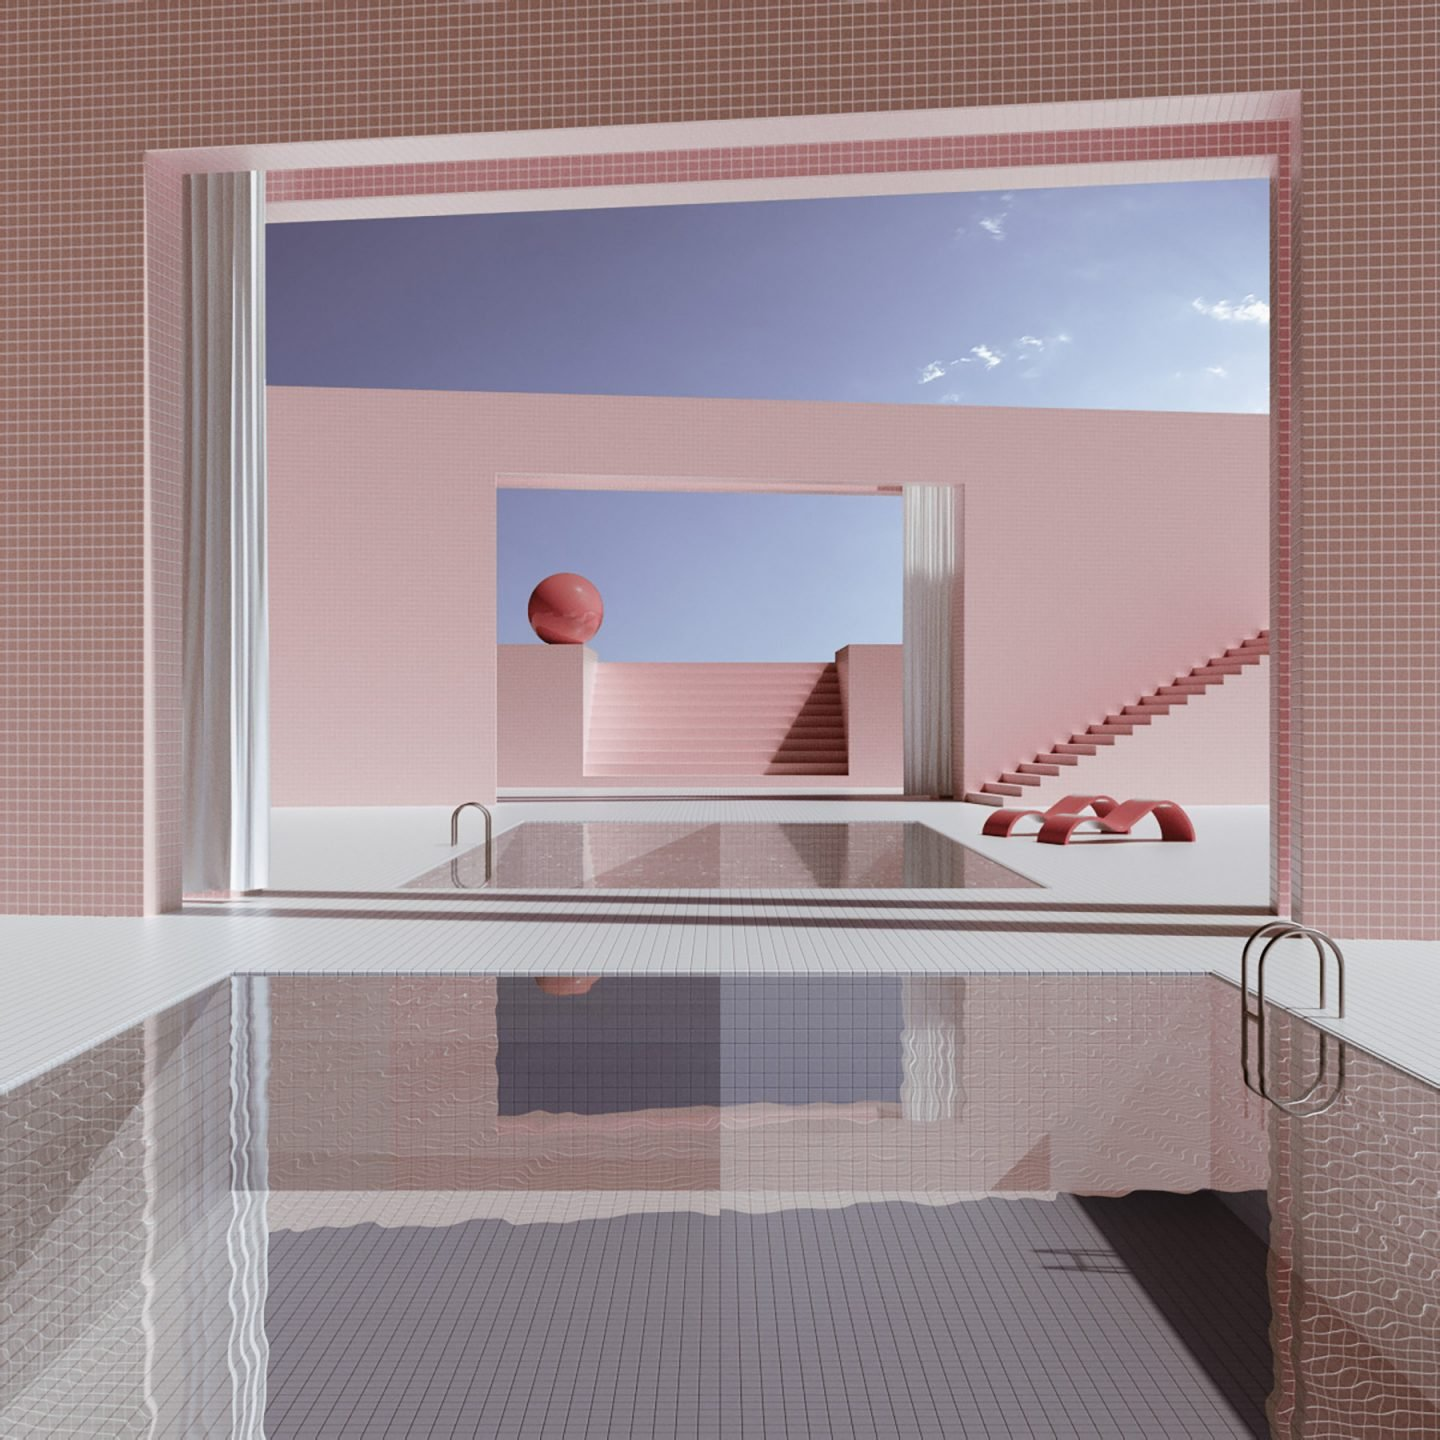 Water Sky Clouds Tiles Pink 3D White Stairs Liminal Surreal 1440x1440